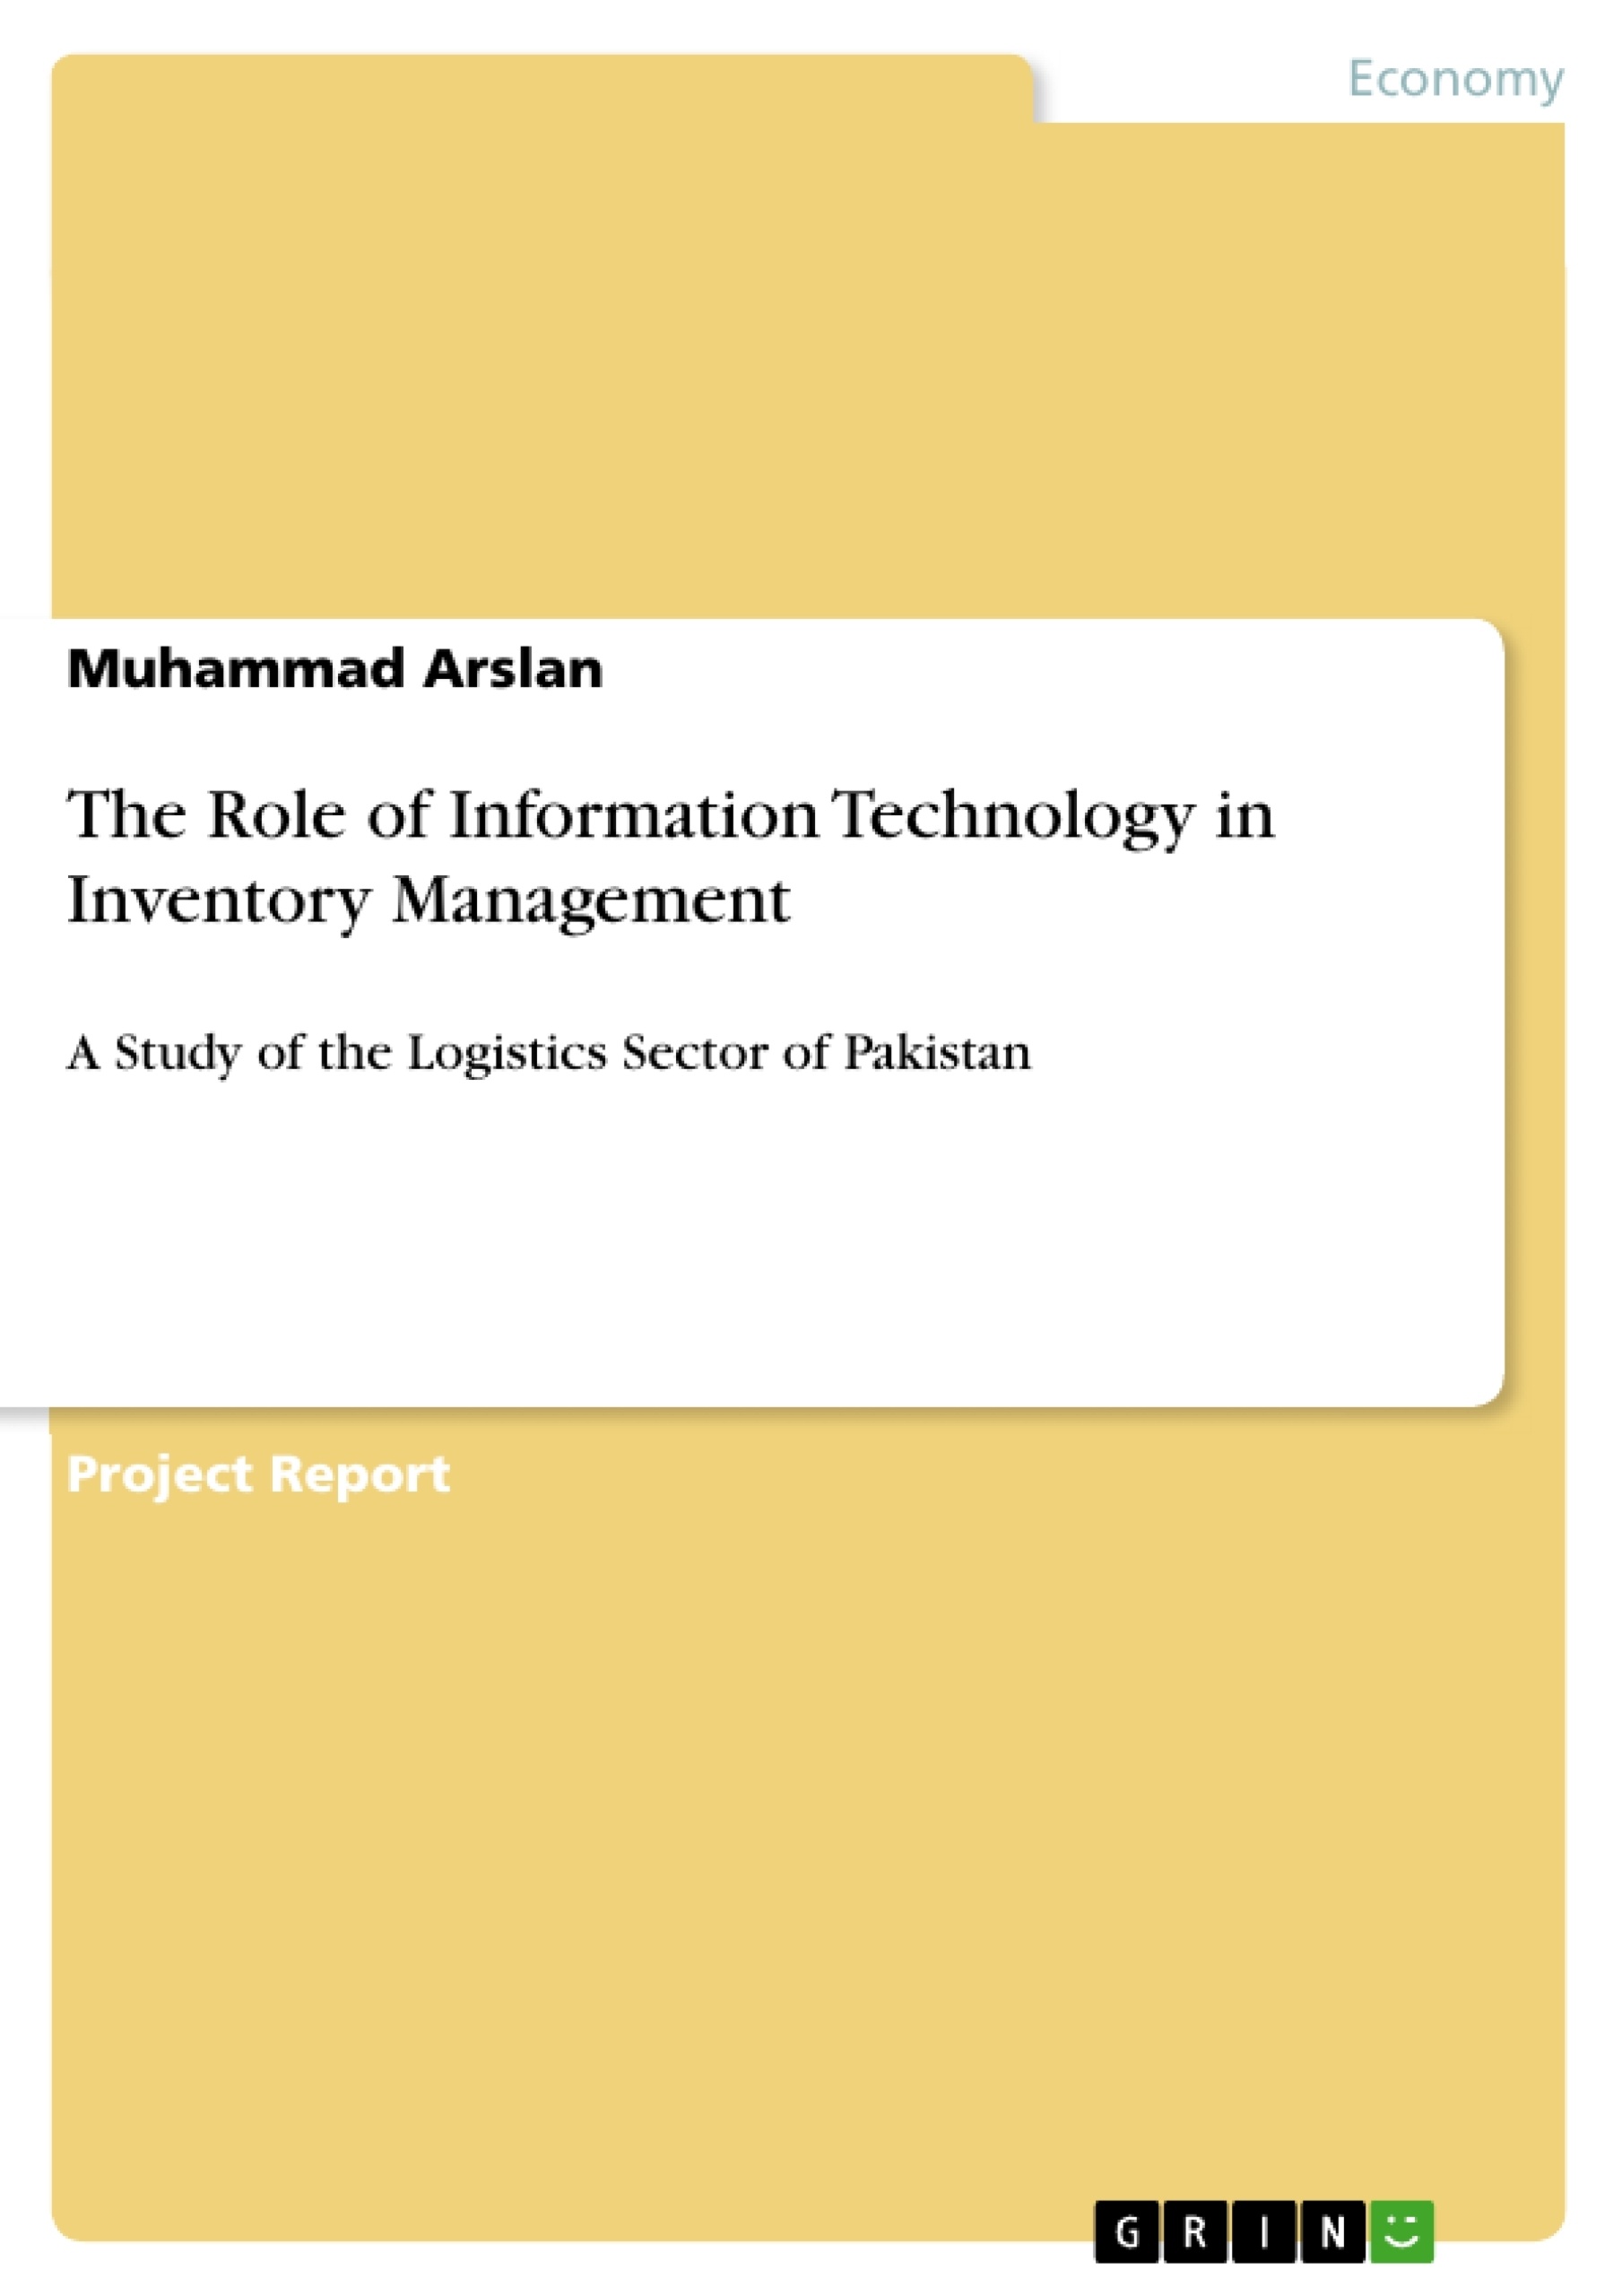 Title: The Role of Information Technology in Inventory Management